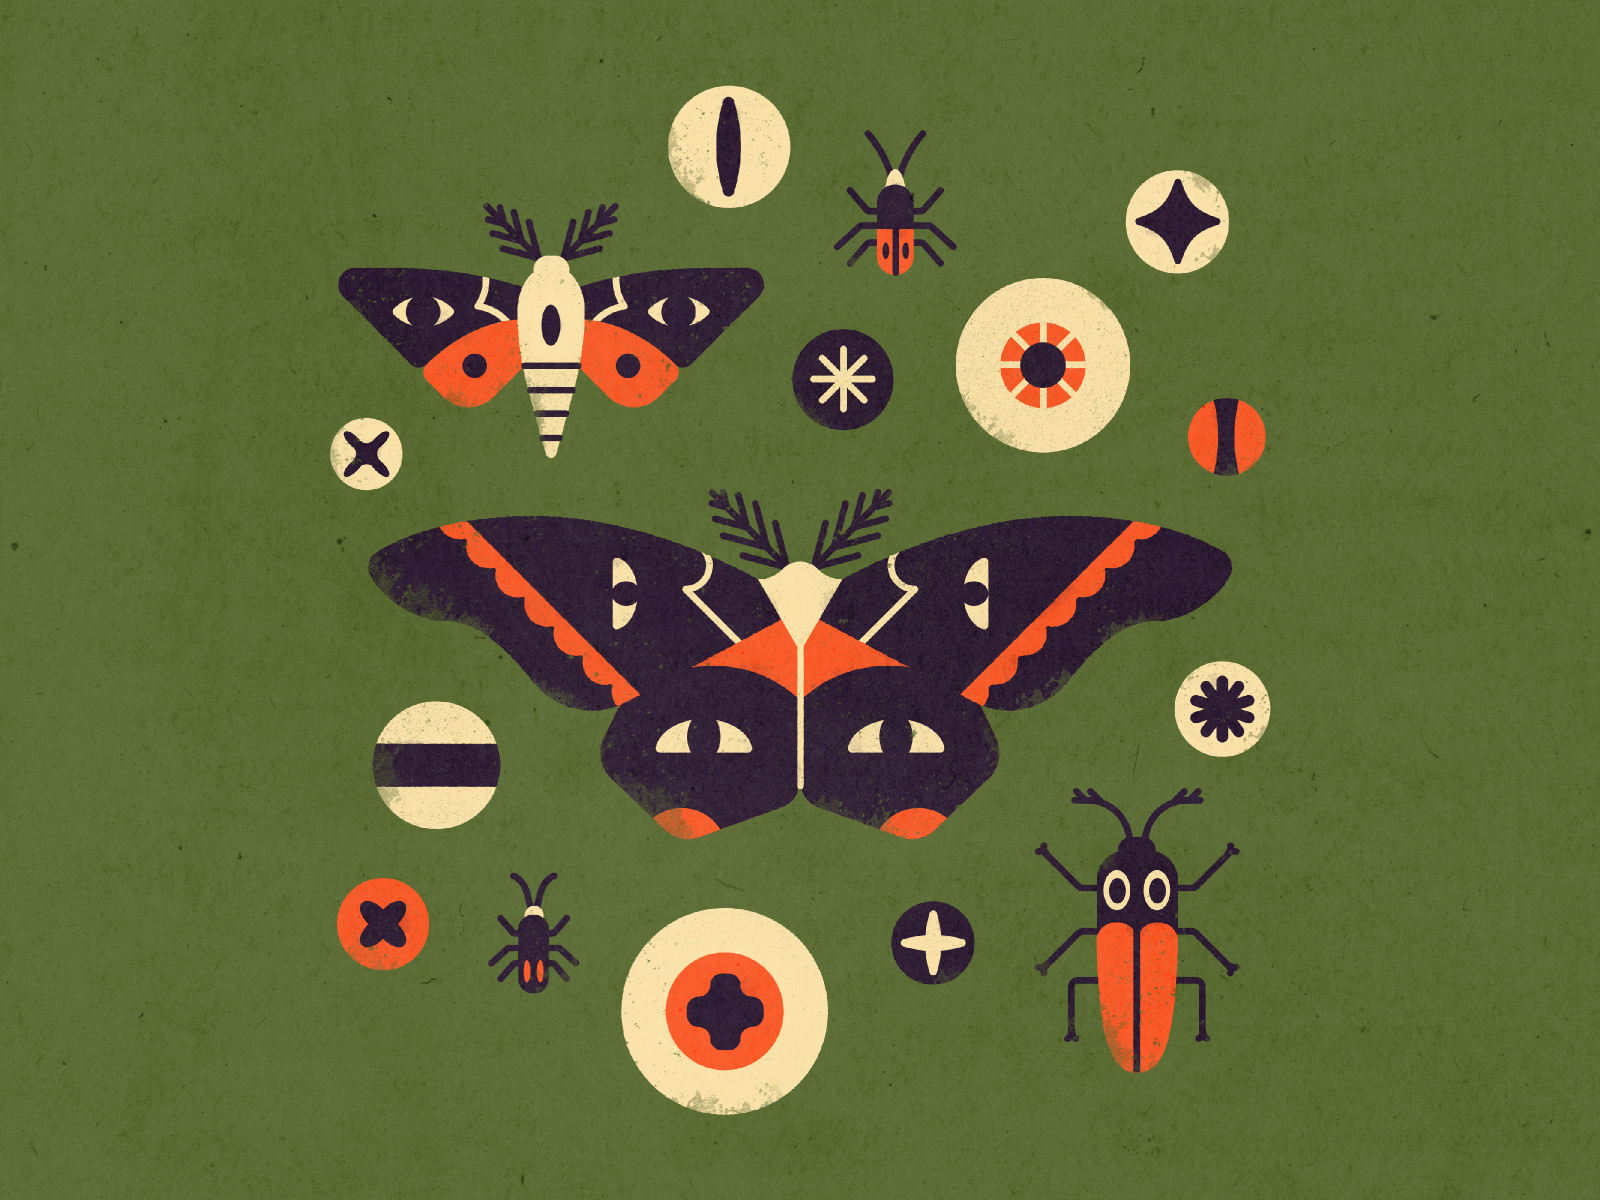 Eyes and Insects by Kim Lawler on Dribbble